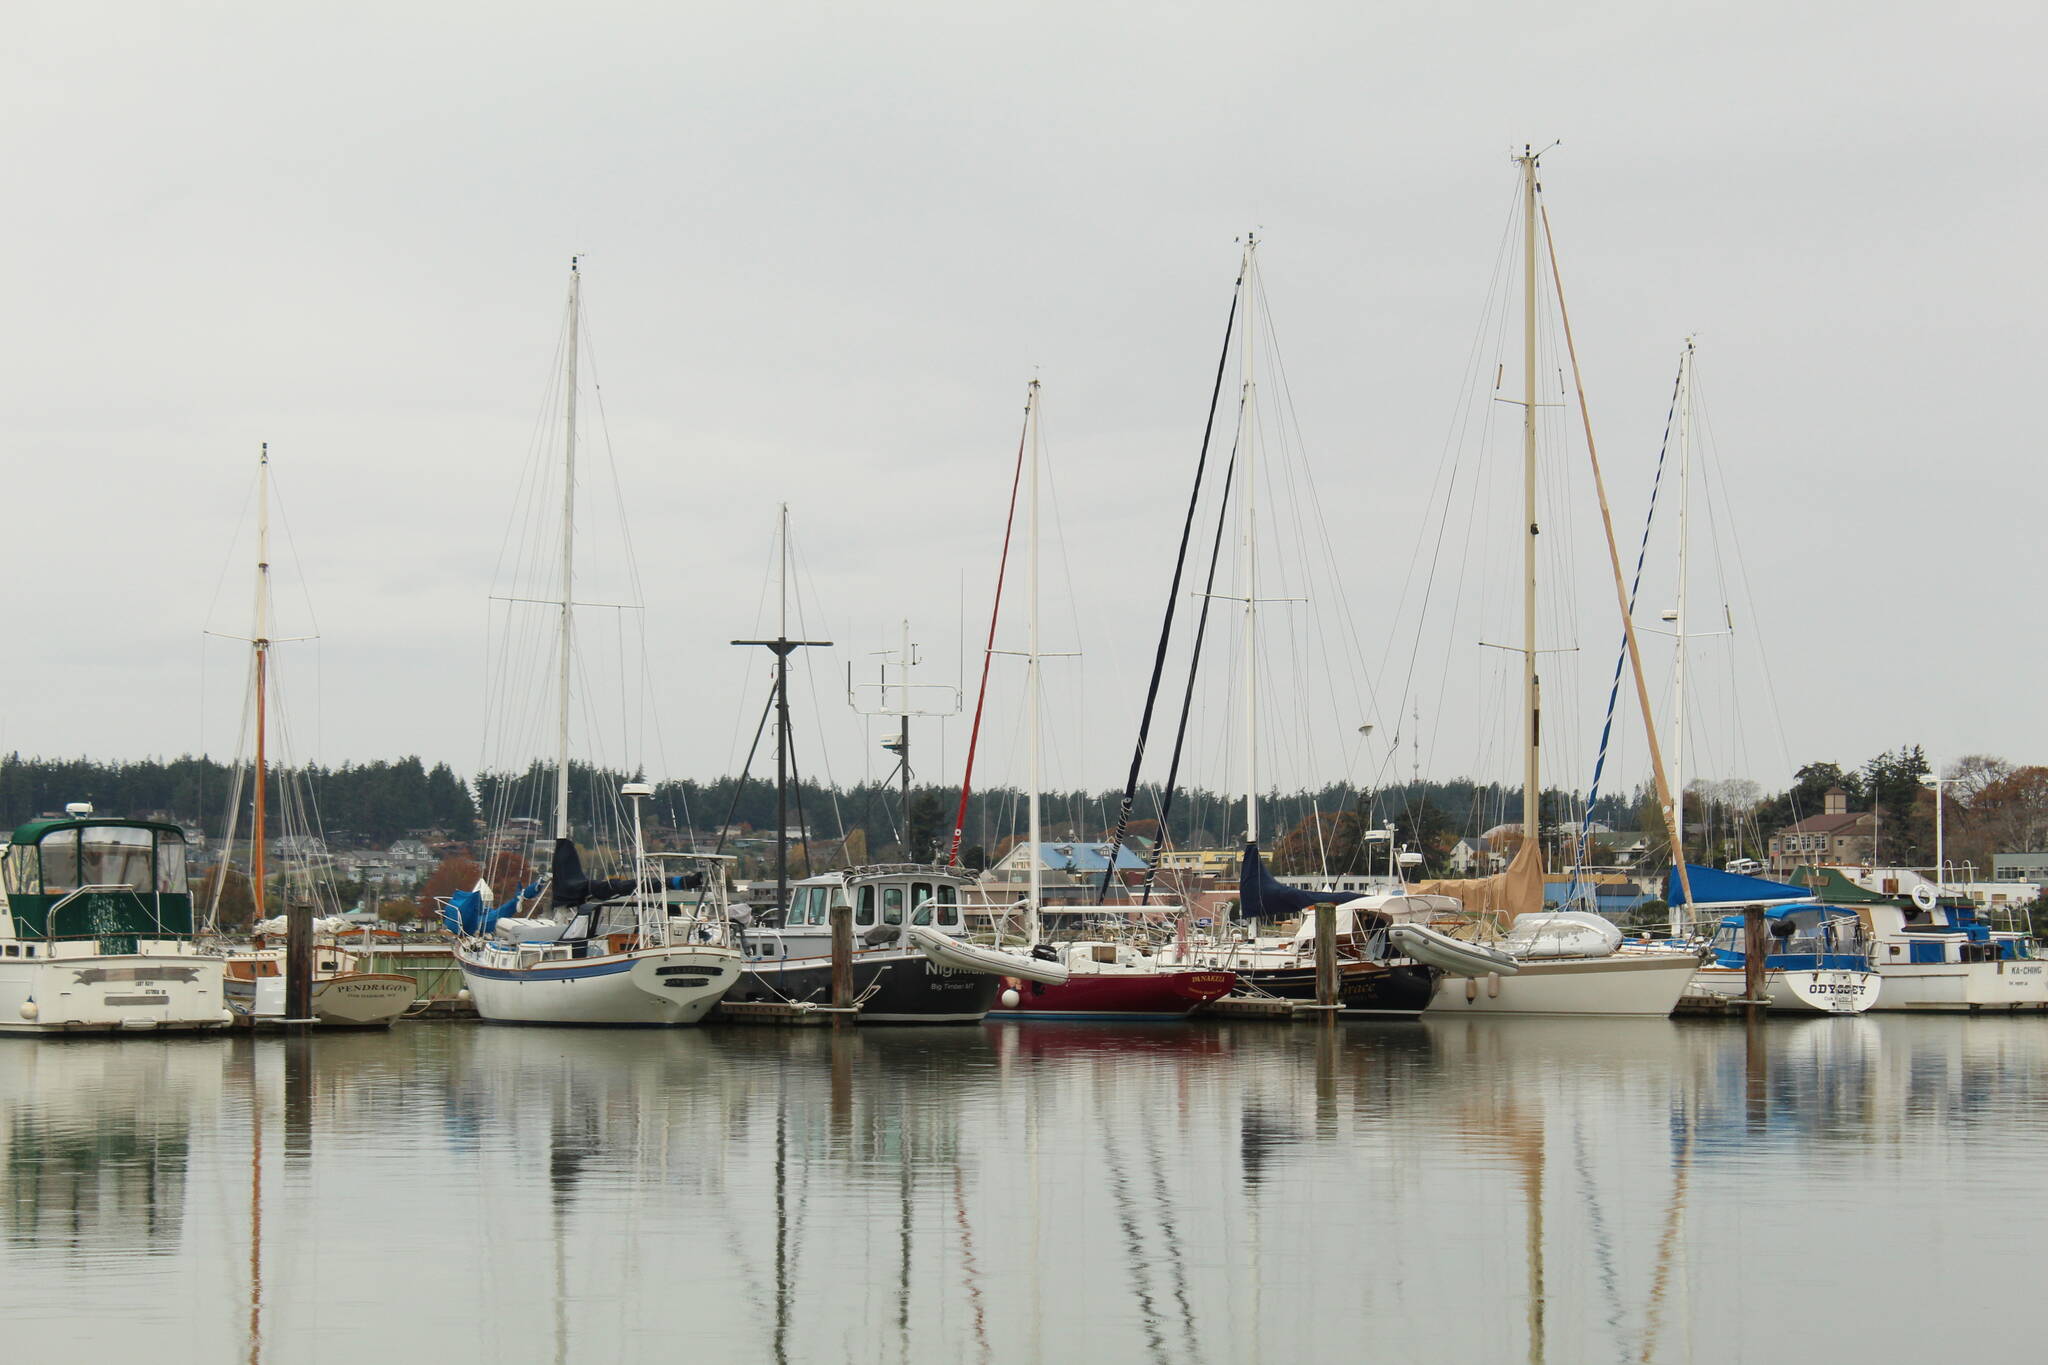 File photo by Karina Andrew/Whidbey News-Times
One recommendation from an Oak Harbor subcommittee dedicated to researching possible uses for ARPA funds was to put $150,000 toward a marina dredging feasibility study.